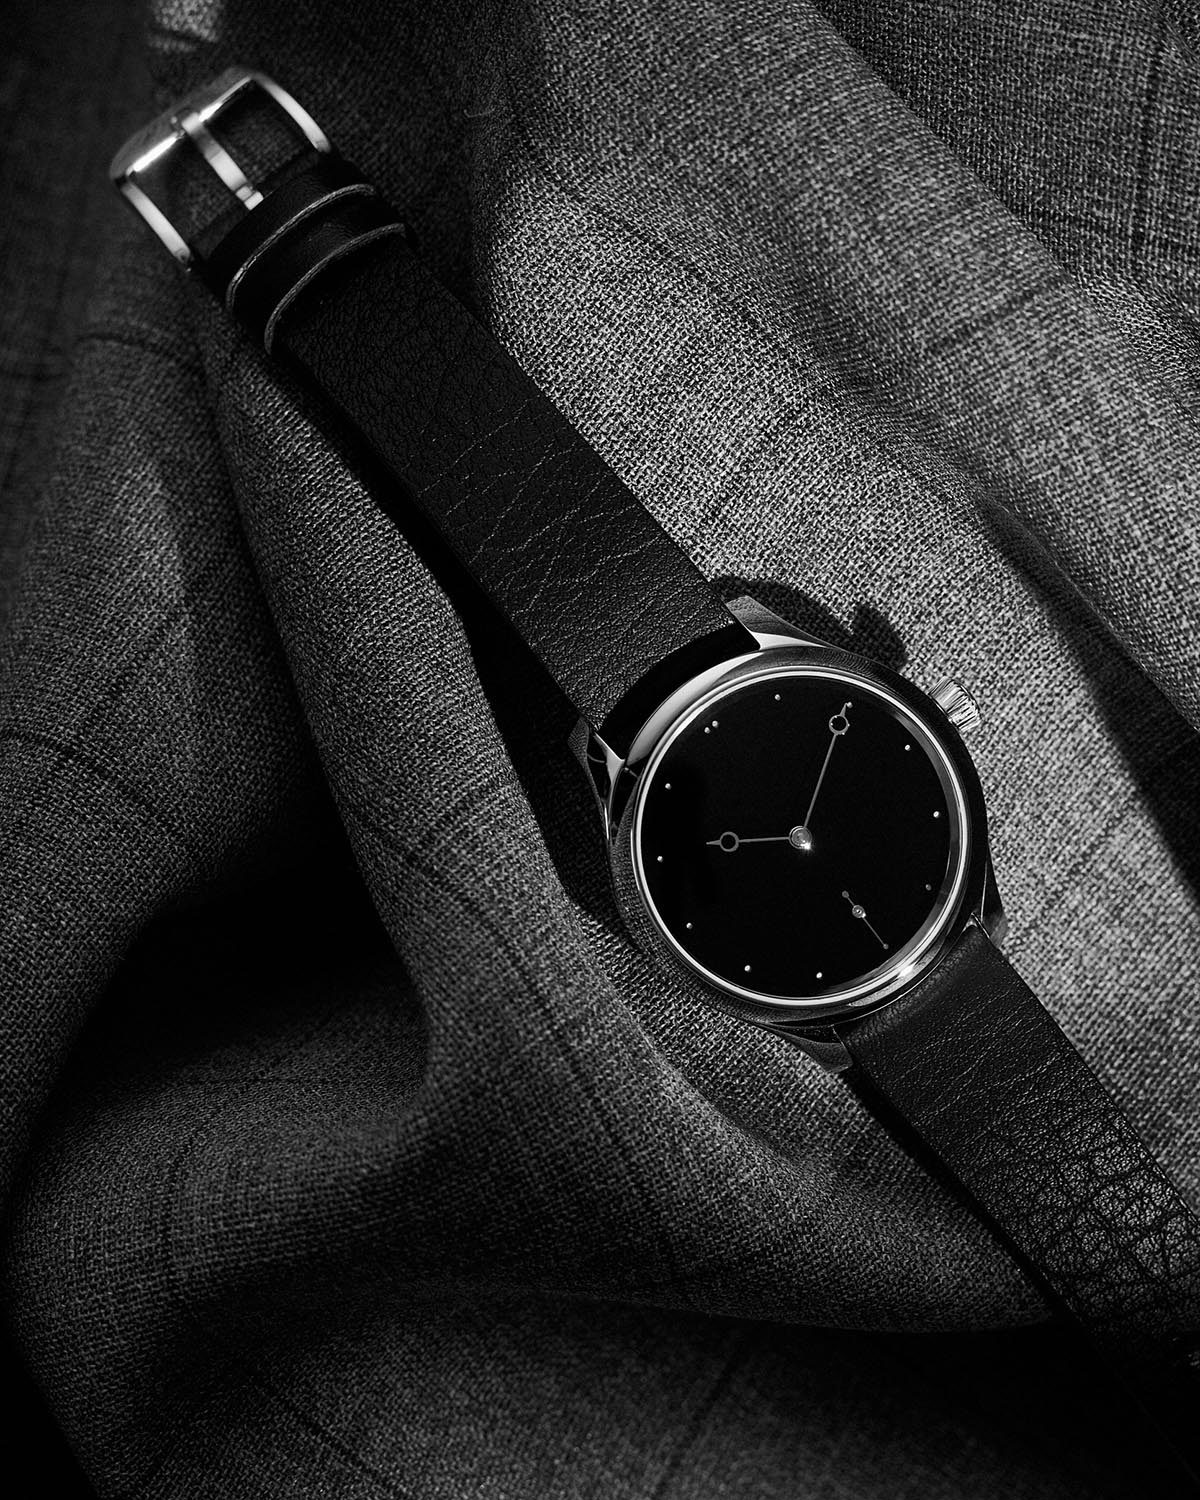 Black Magic: H. Moser & Cie. x The Armoury’s Endeavour Small Seconds ...